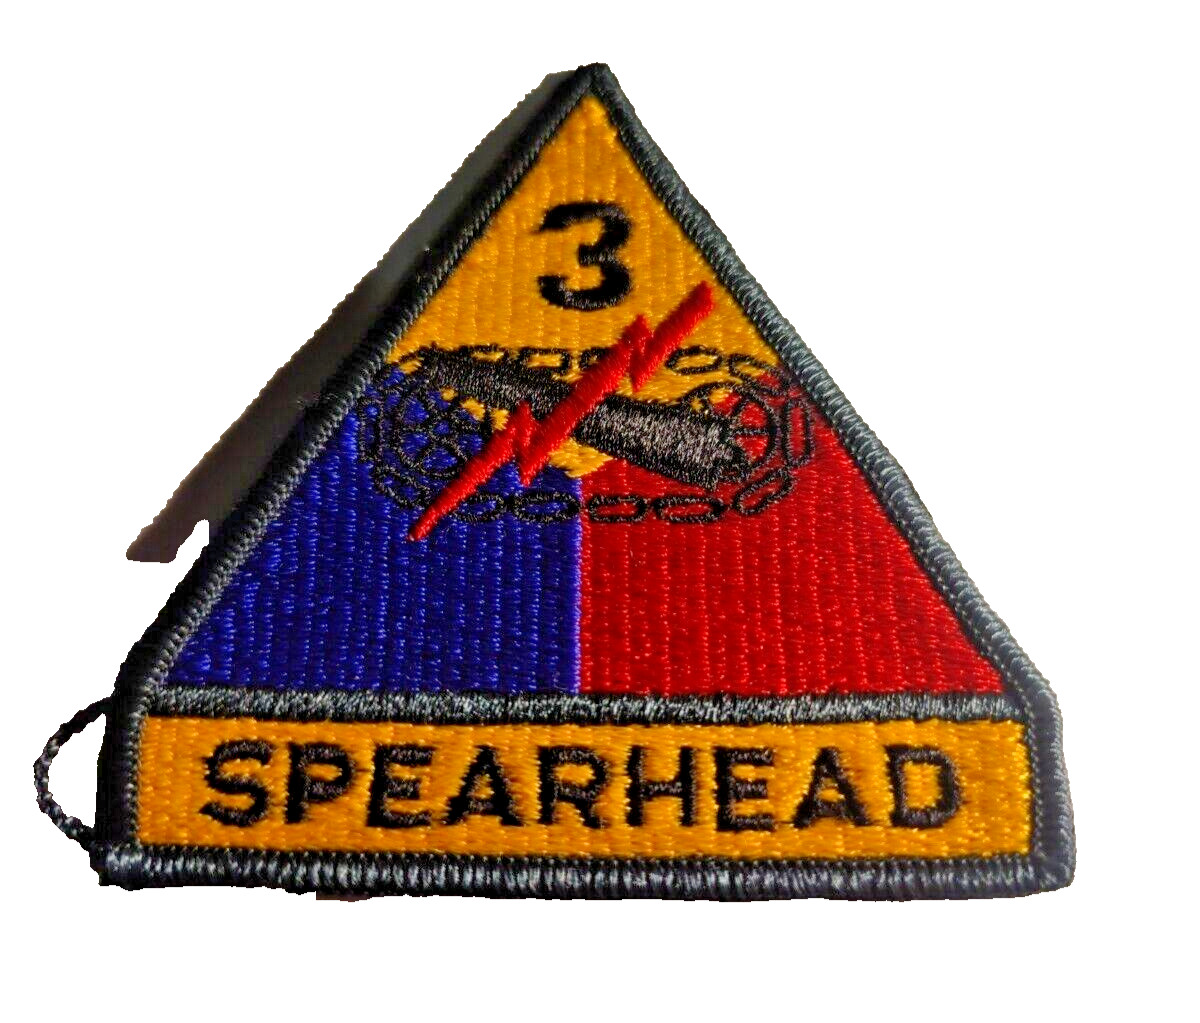 1956/64 ELVIS STYLE 3RD ARMORED DIV ONE PCE W/ TAB SEWN ON PATCH BOTH AG BRDR CE